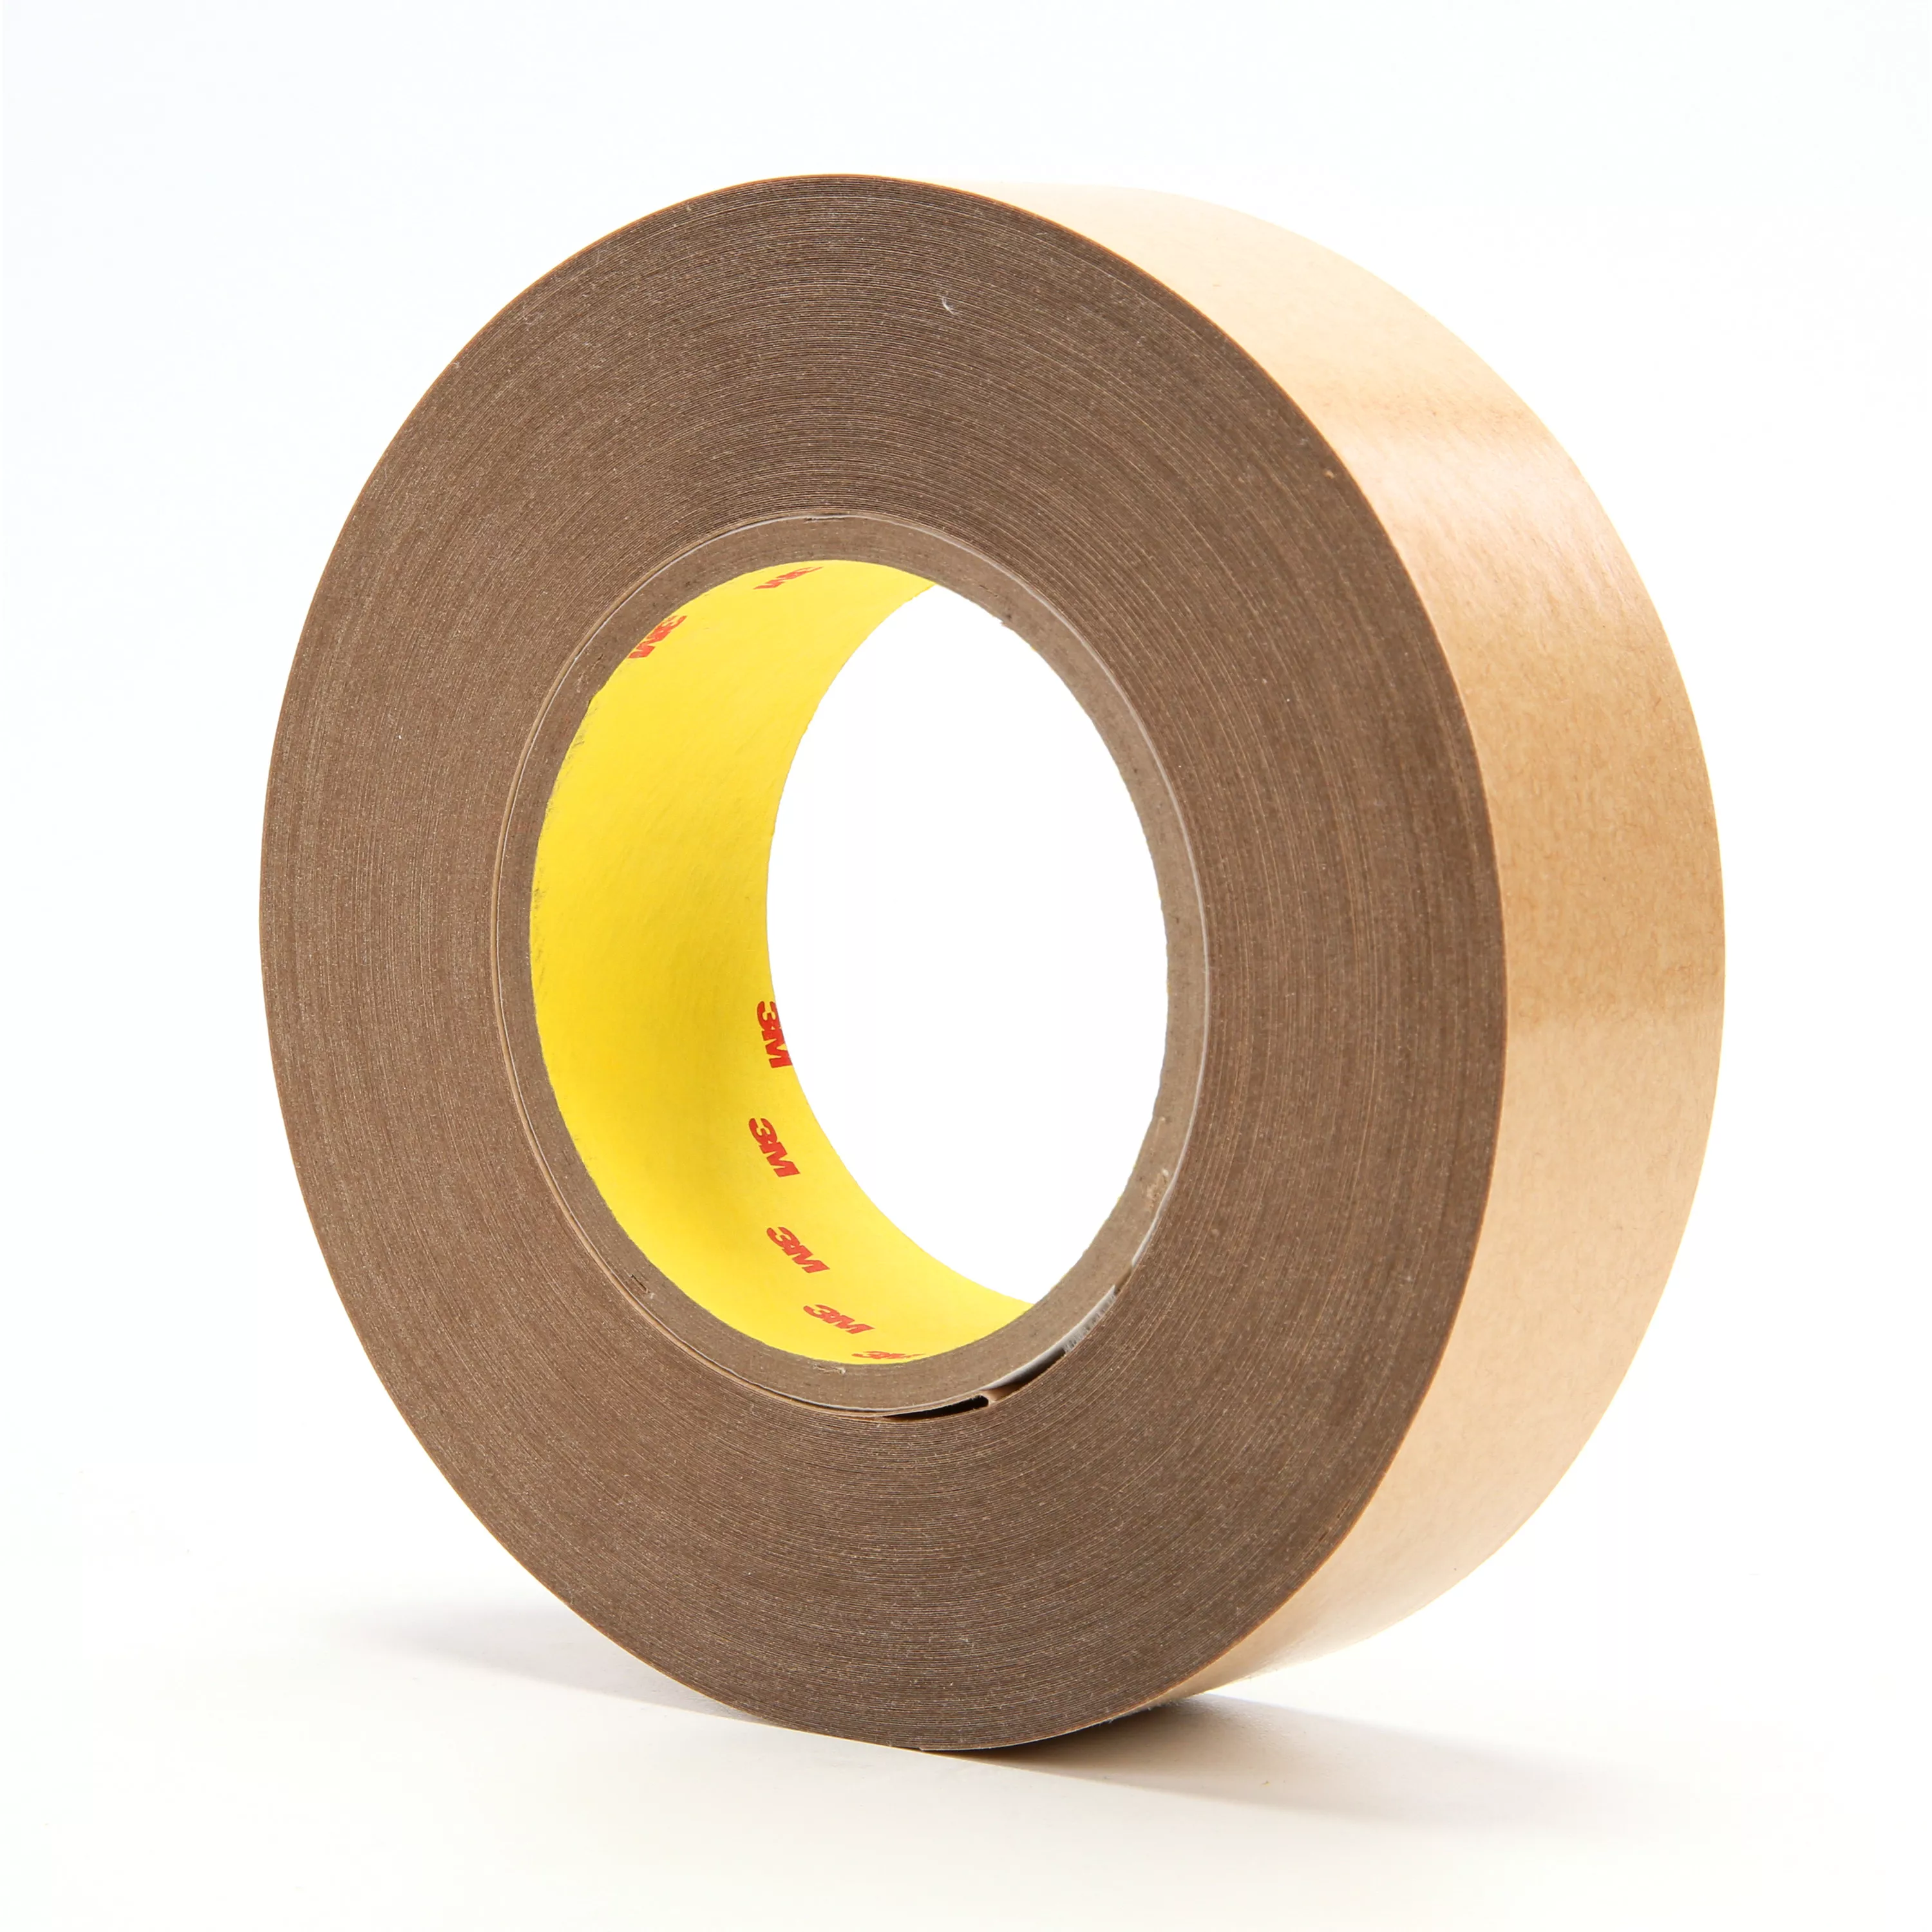 3M™ Adhesive Transfer Tape 950, Clear, 1 1/2 in x 60 yd, 5 mil, 24
Roll/Case